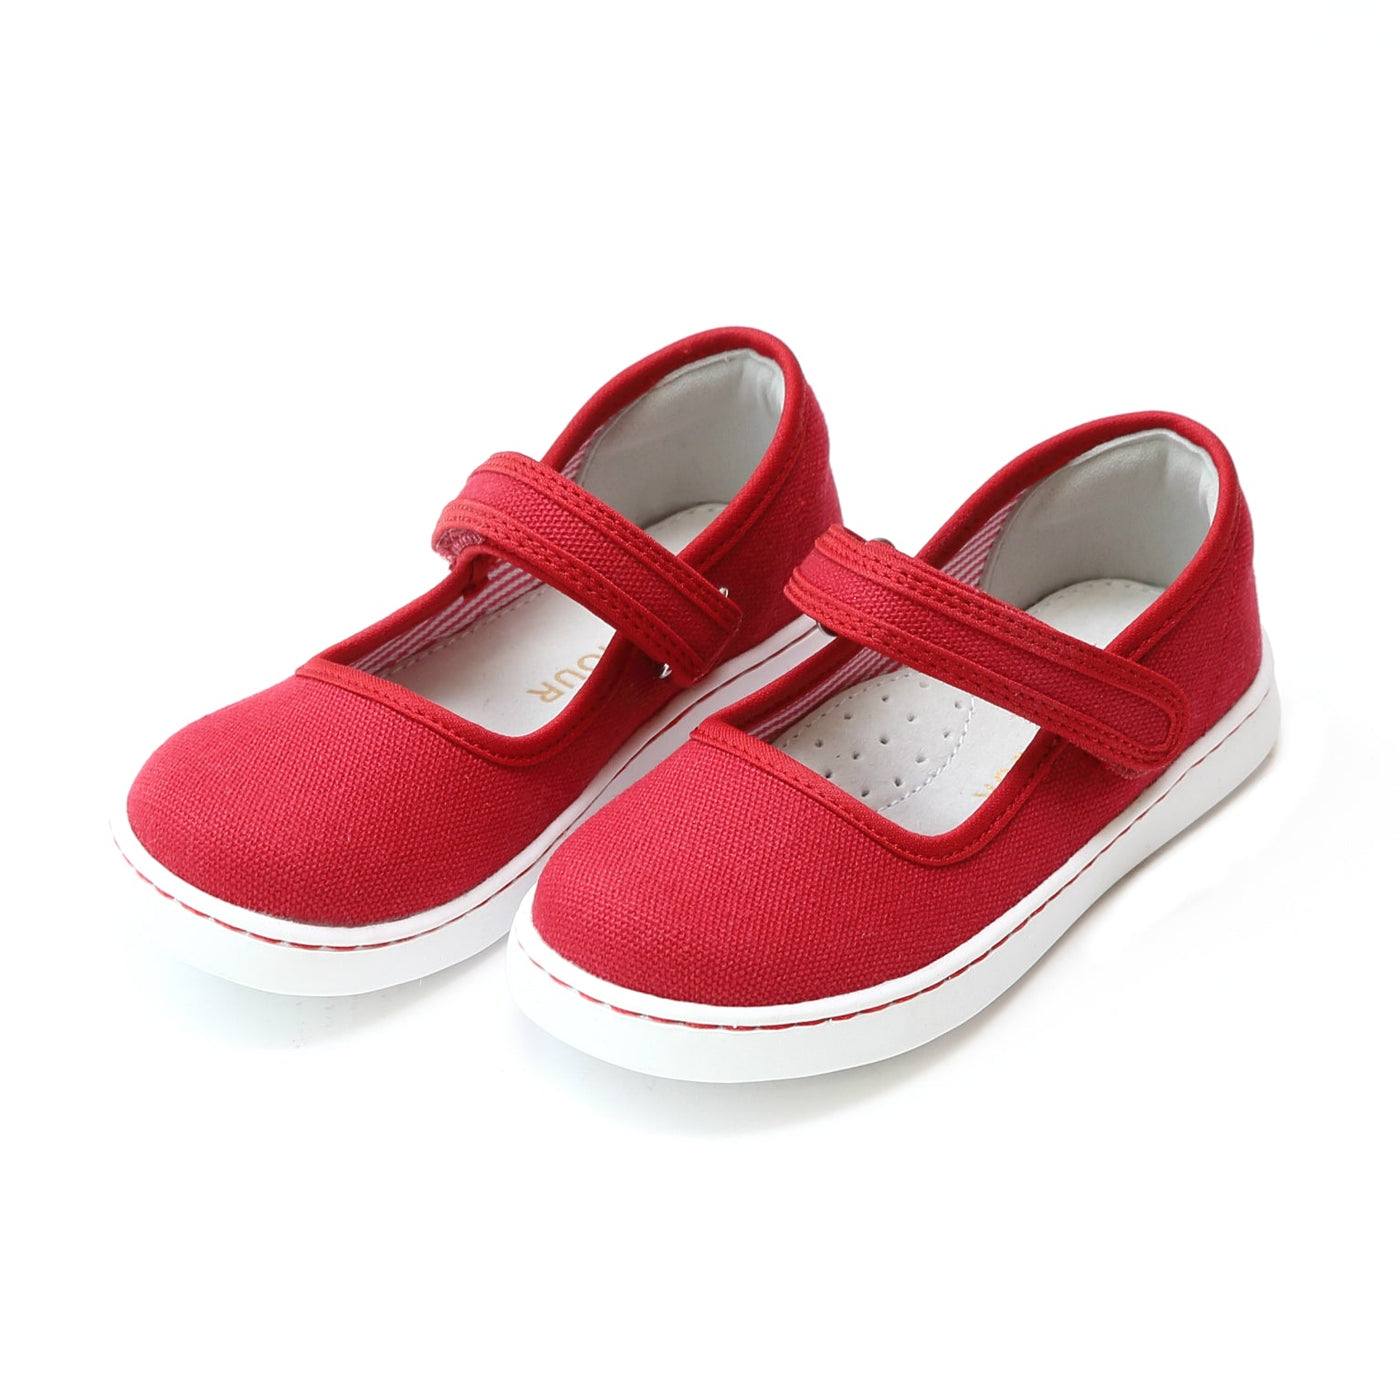 L'Amour Red Jenna Canvas Mary Jane